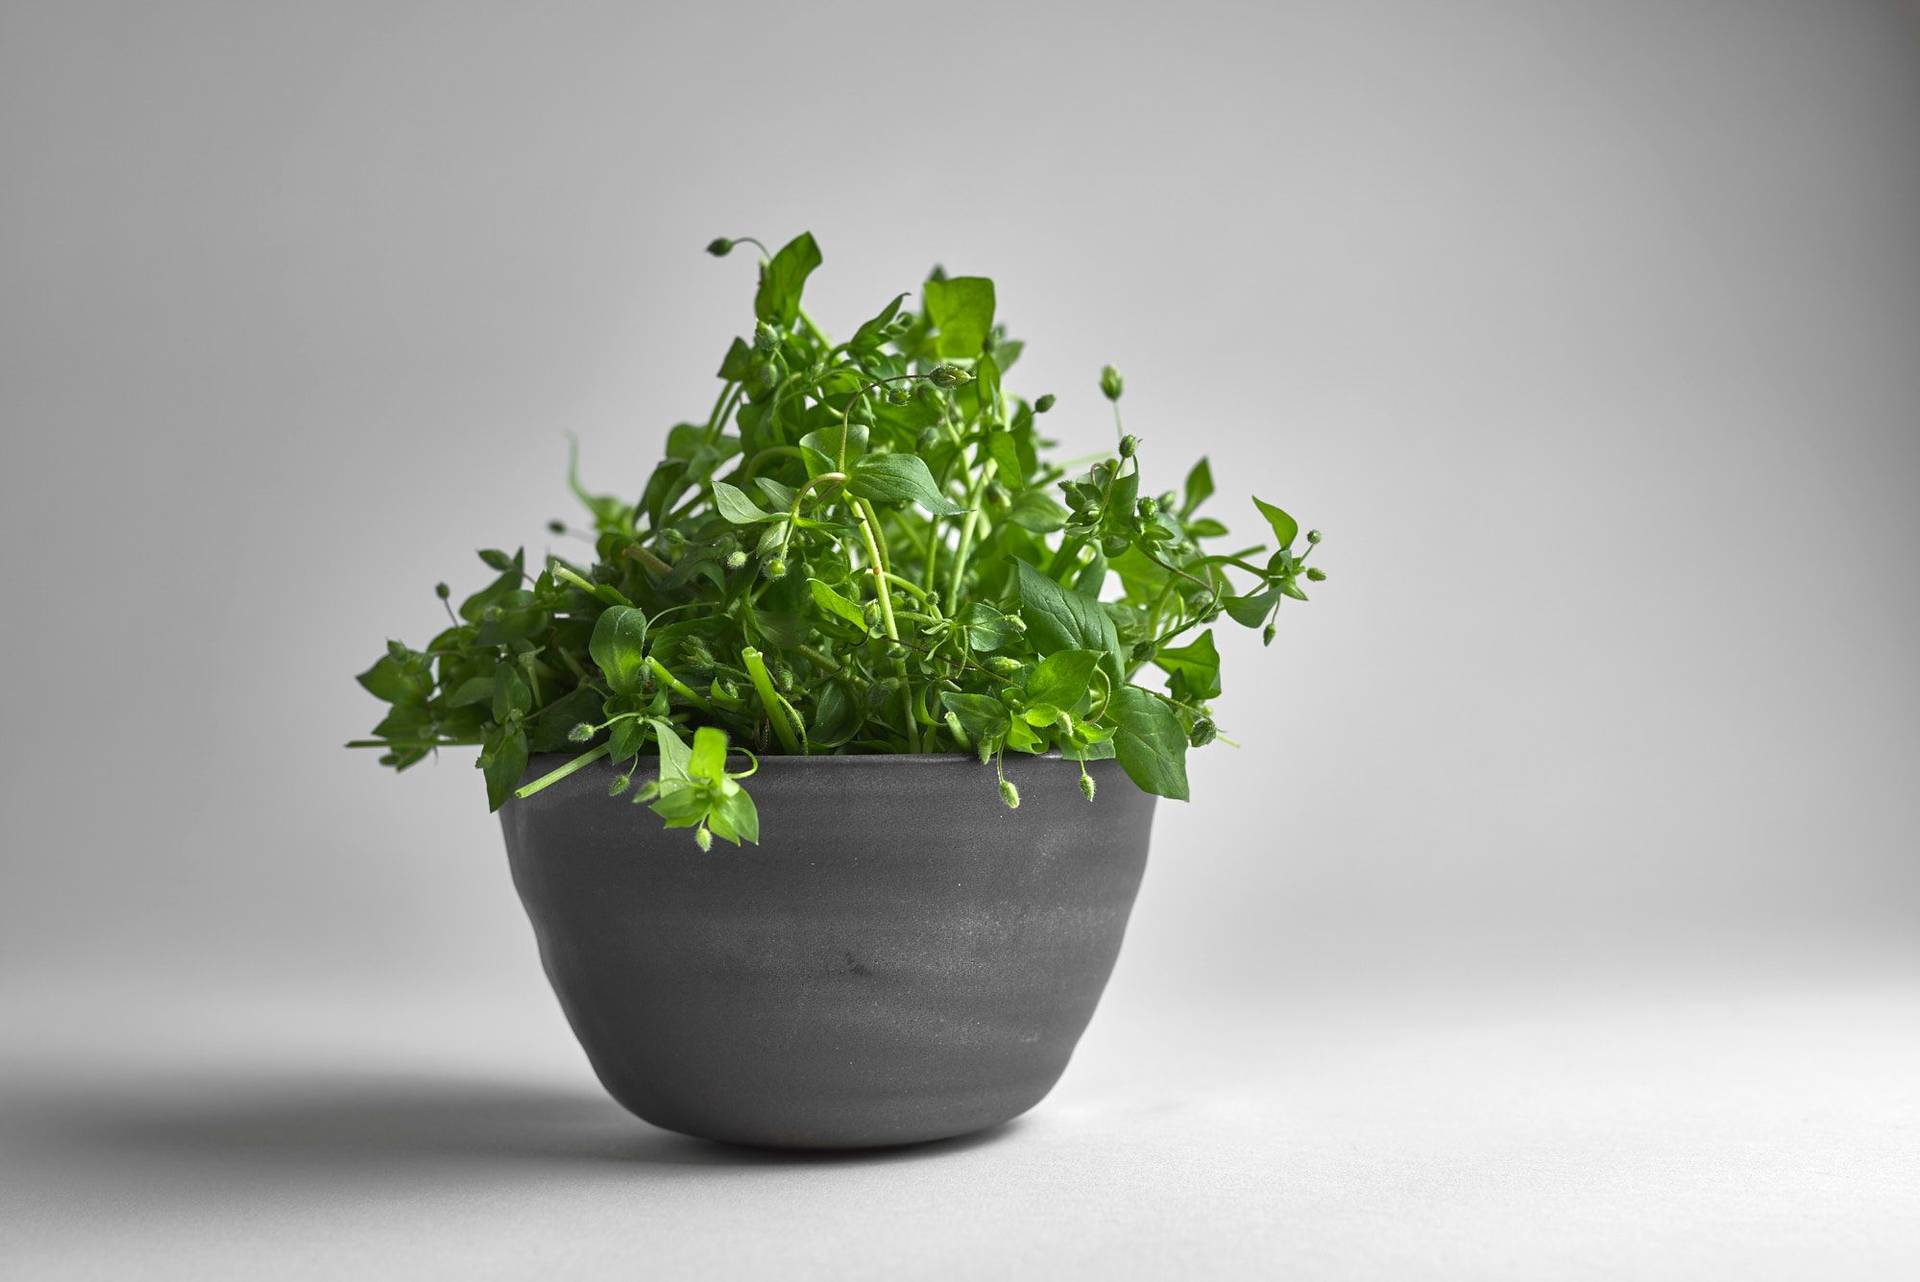 chickweed in a gray ceramic bowl on white background